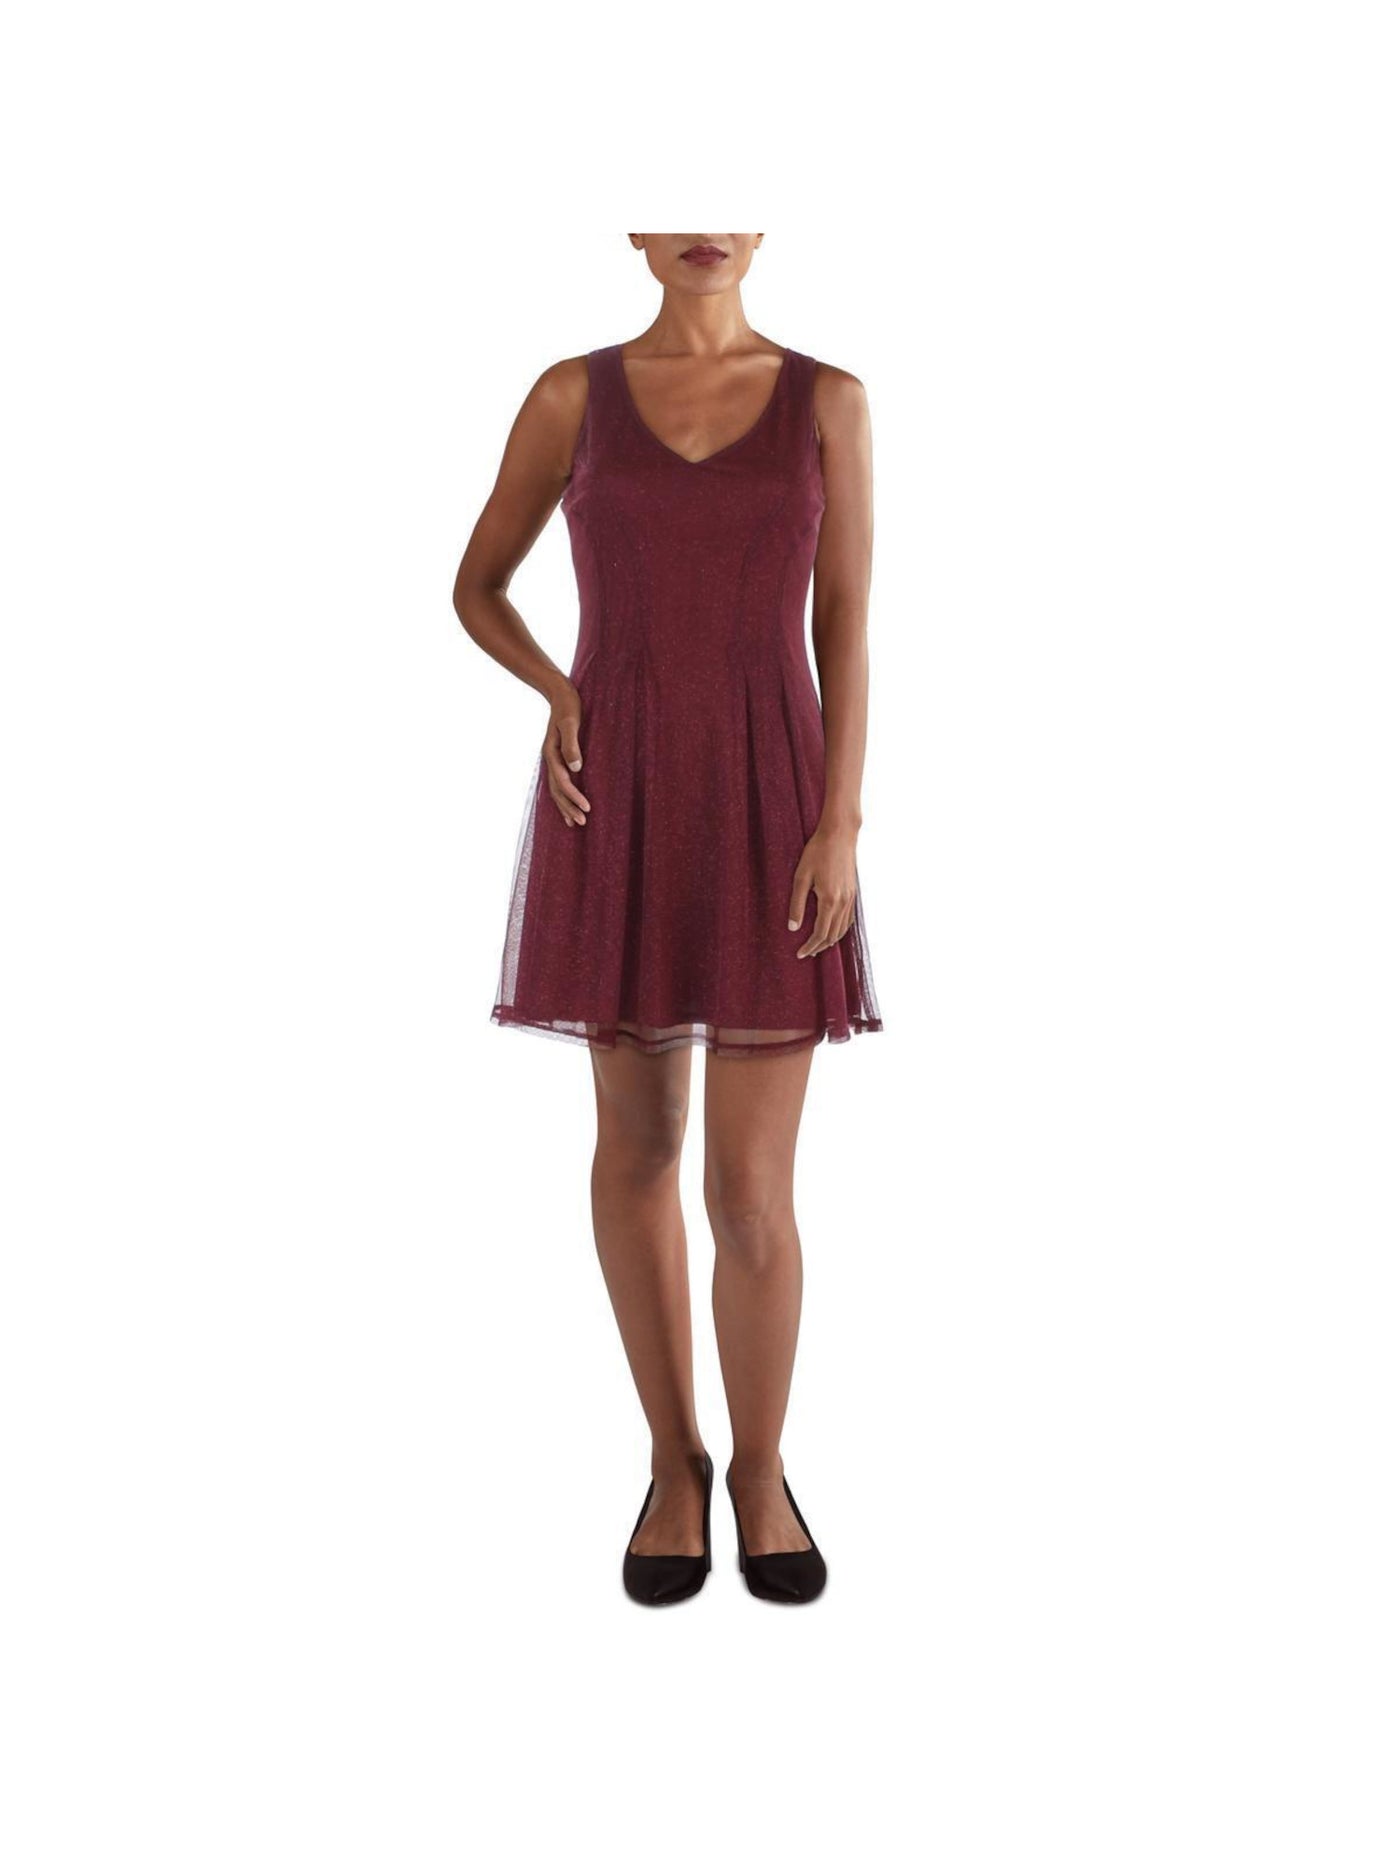 CITY STUDIO Womens Burgundy Stretch Zippered Pleated Lined Sleeveless V Neck Short Party Fit + Flare Dress Juniors 3